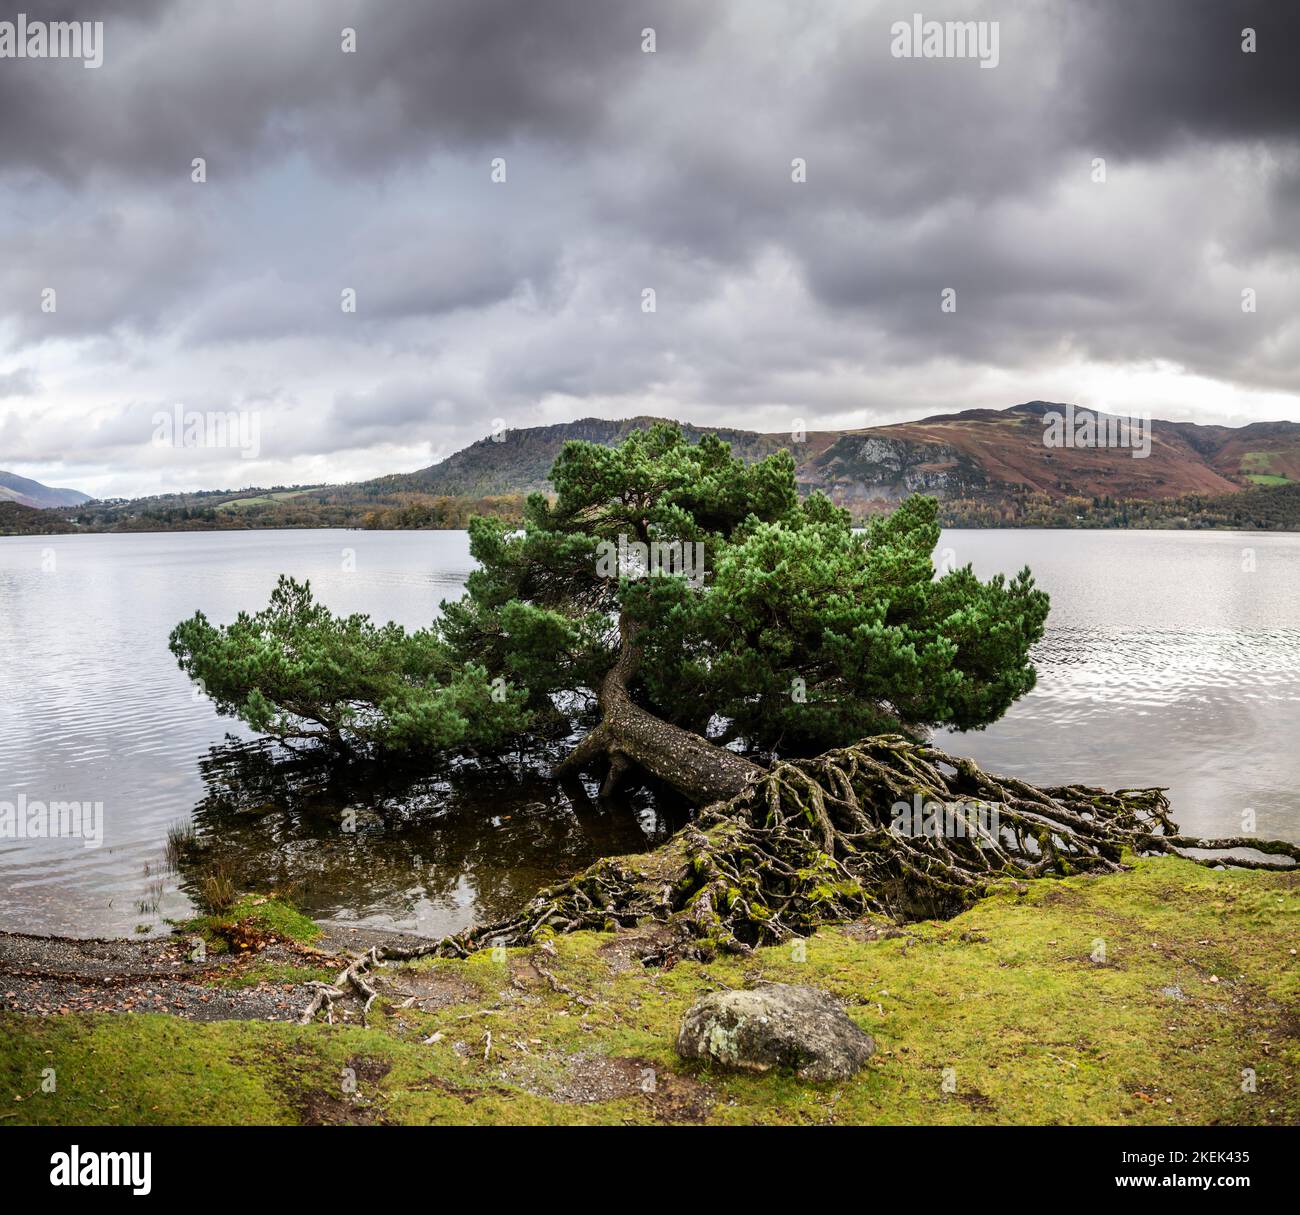 A fallen pine tree that has retained its roots and thrives by the shore of Derwentwater, English Lake District. Stock Photo